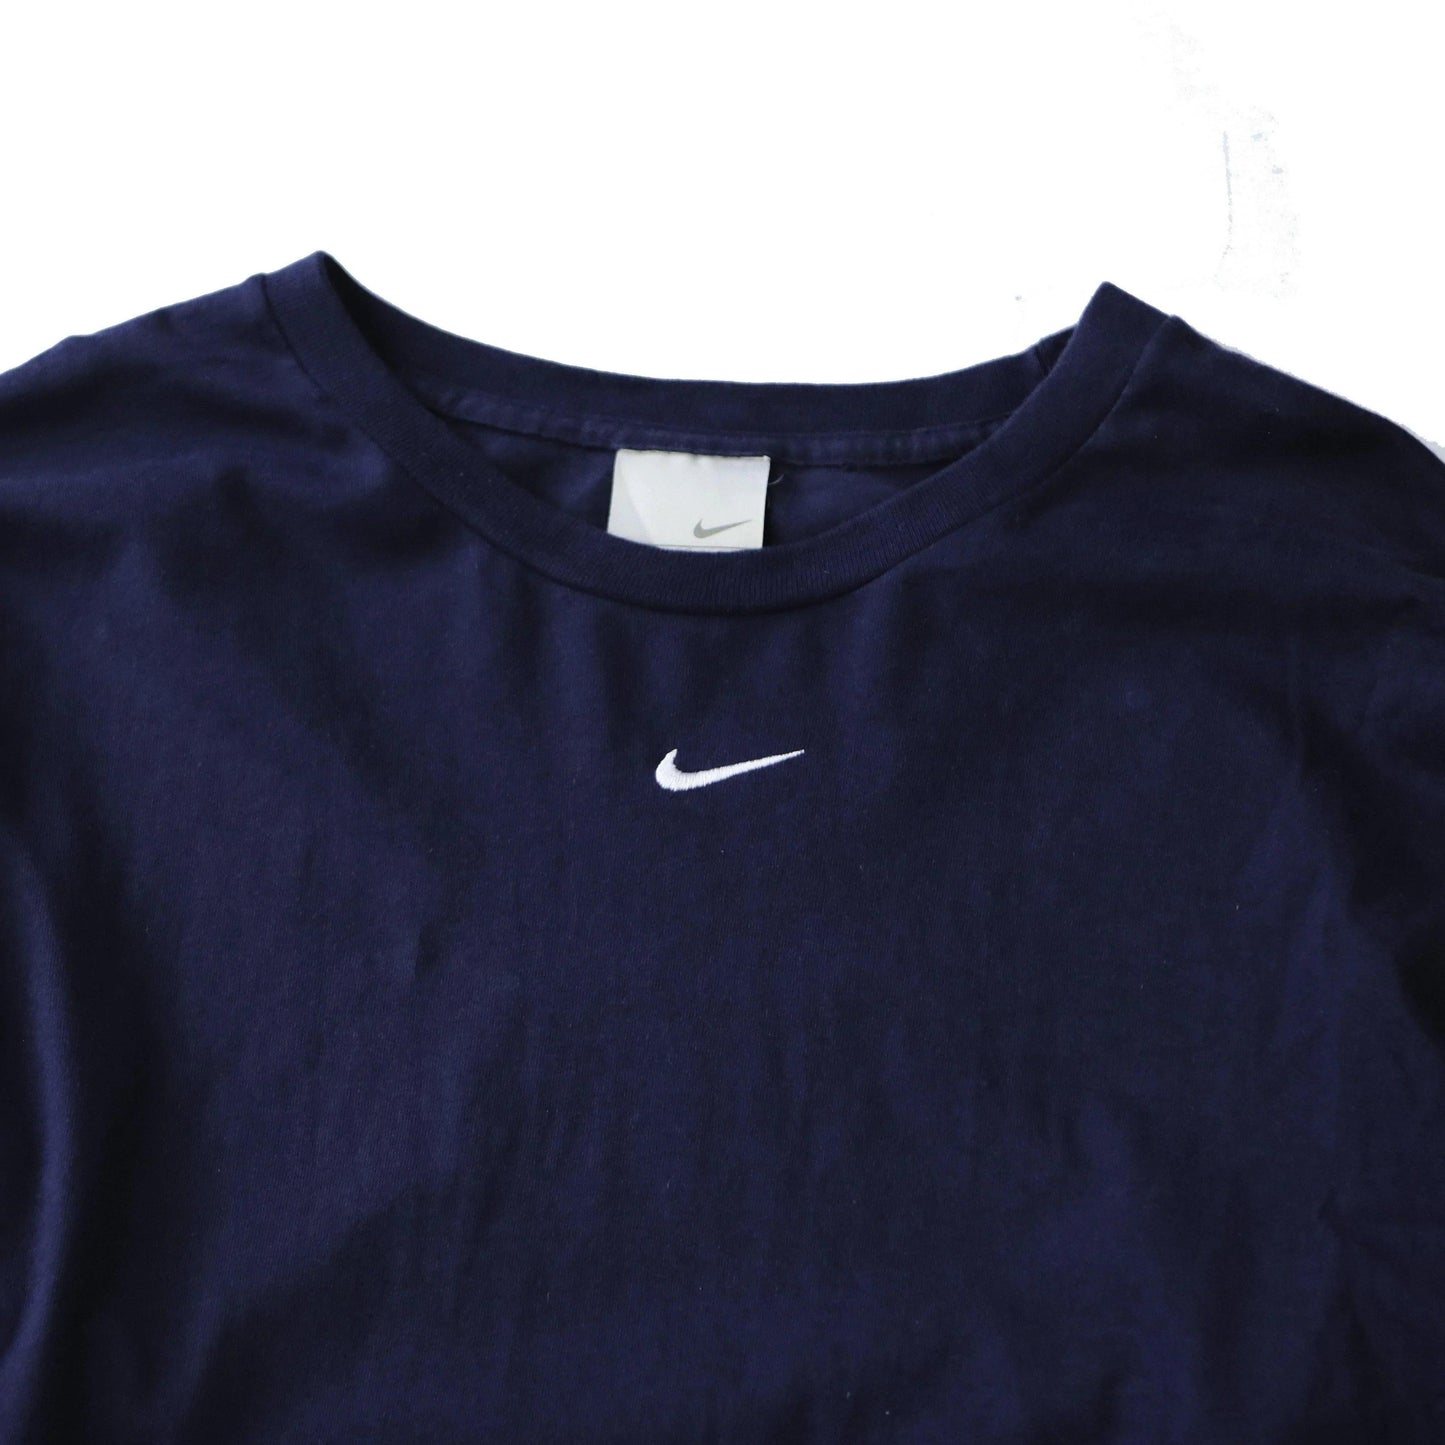 NIKE CENTRE SWOOSH TEE (L) - Known Source